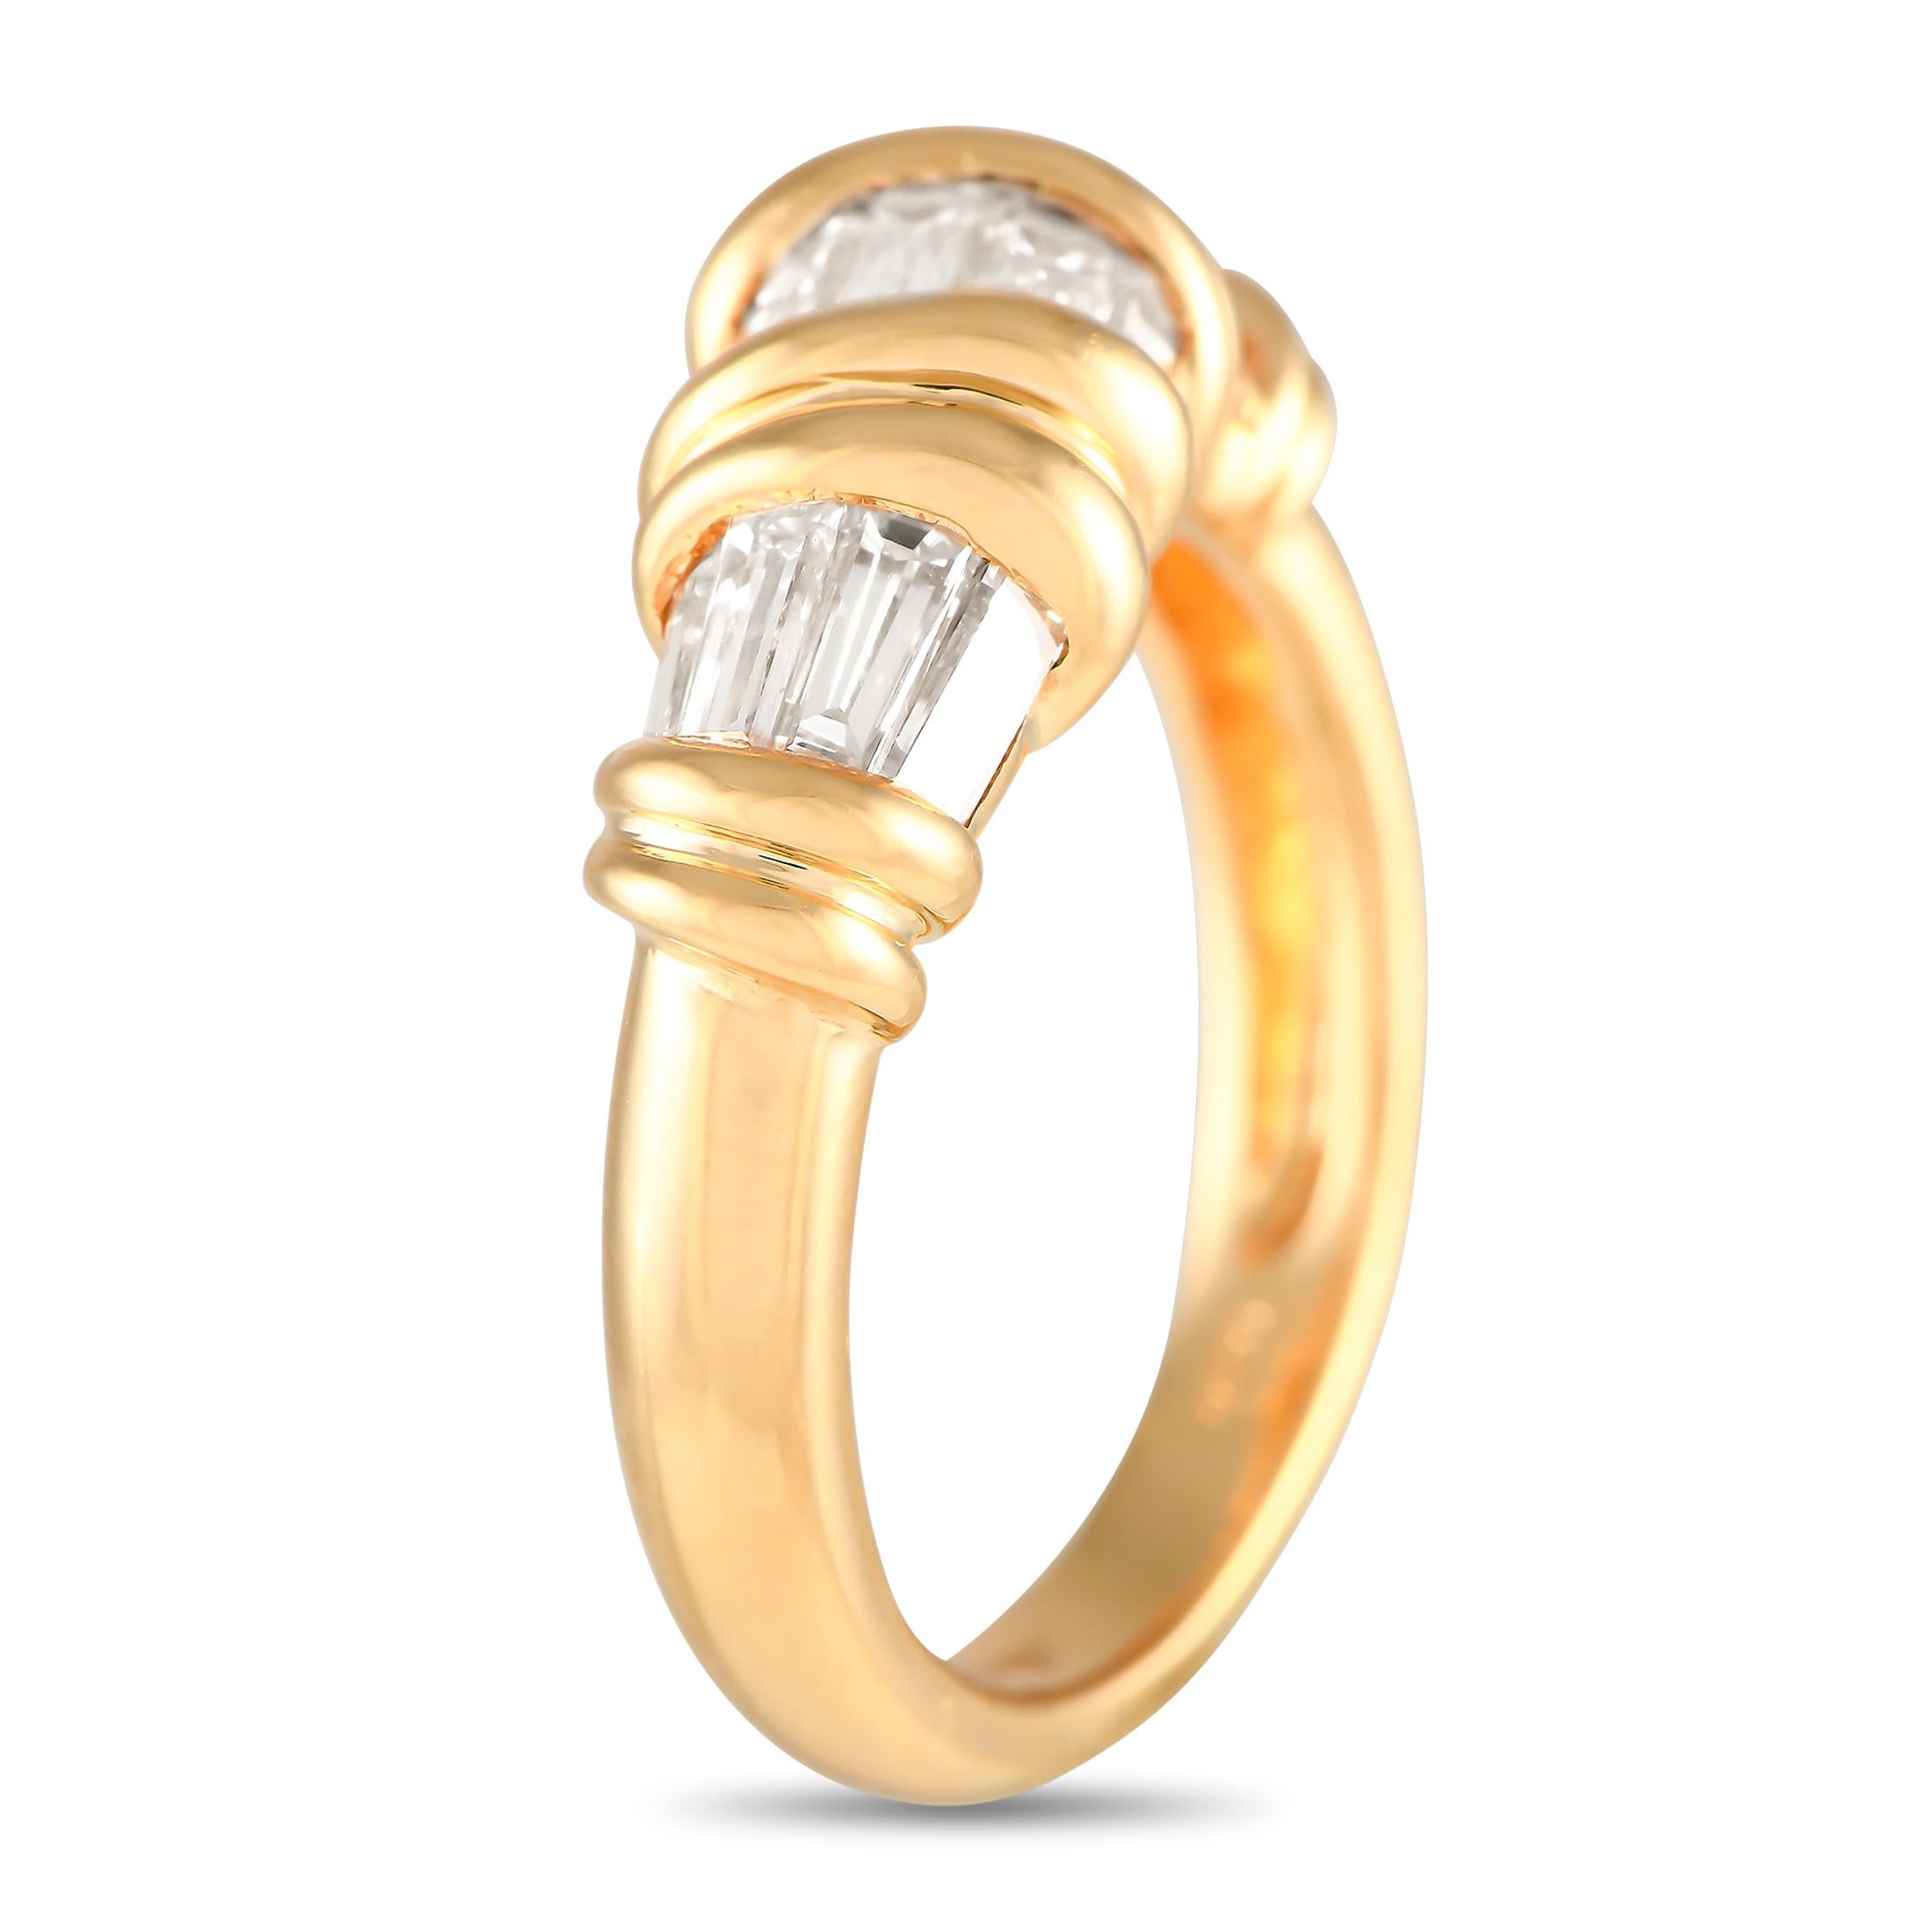 Curved lines and rounded edges give this luxury ring a distinct sense of movement. The 18K yellow gold setting beautifully showcases an array of diamond baguettes, which together possess a total weight of 1.47 carats. This piece features a 3mm band